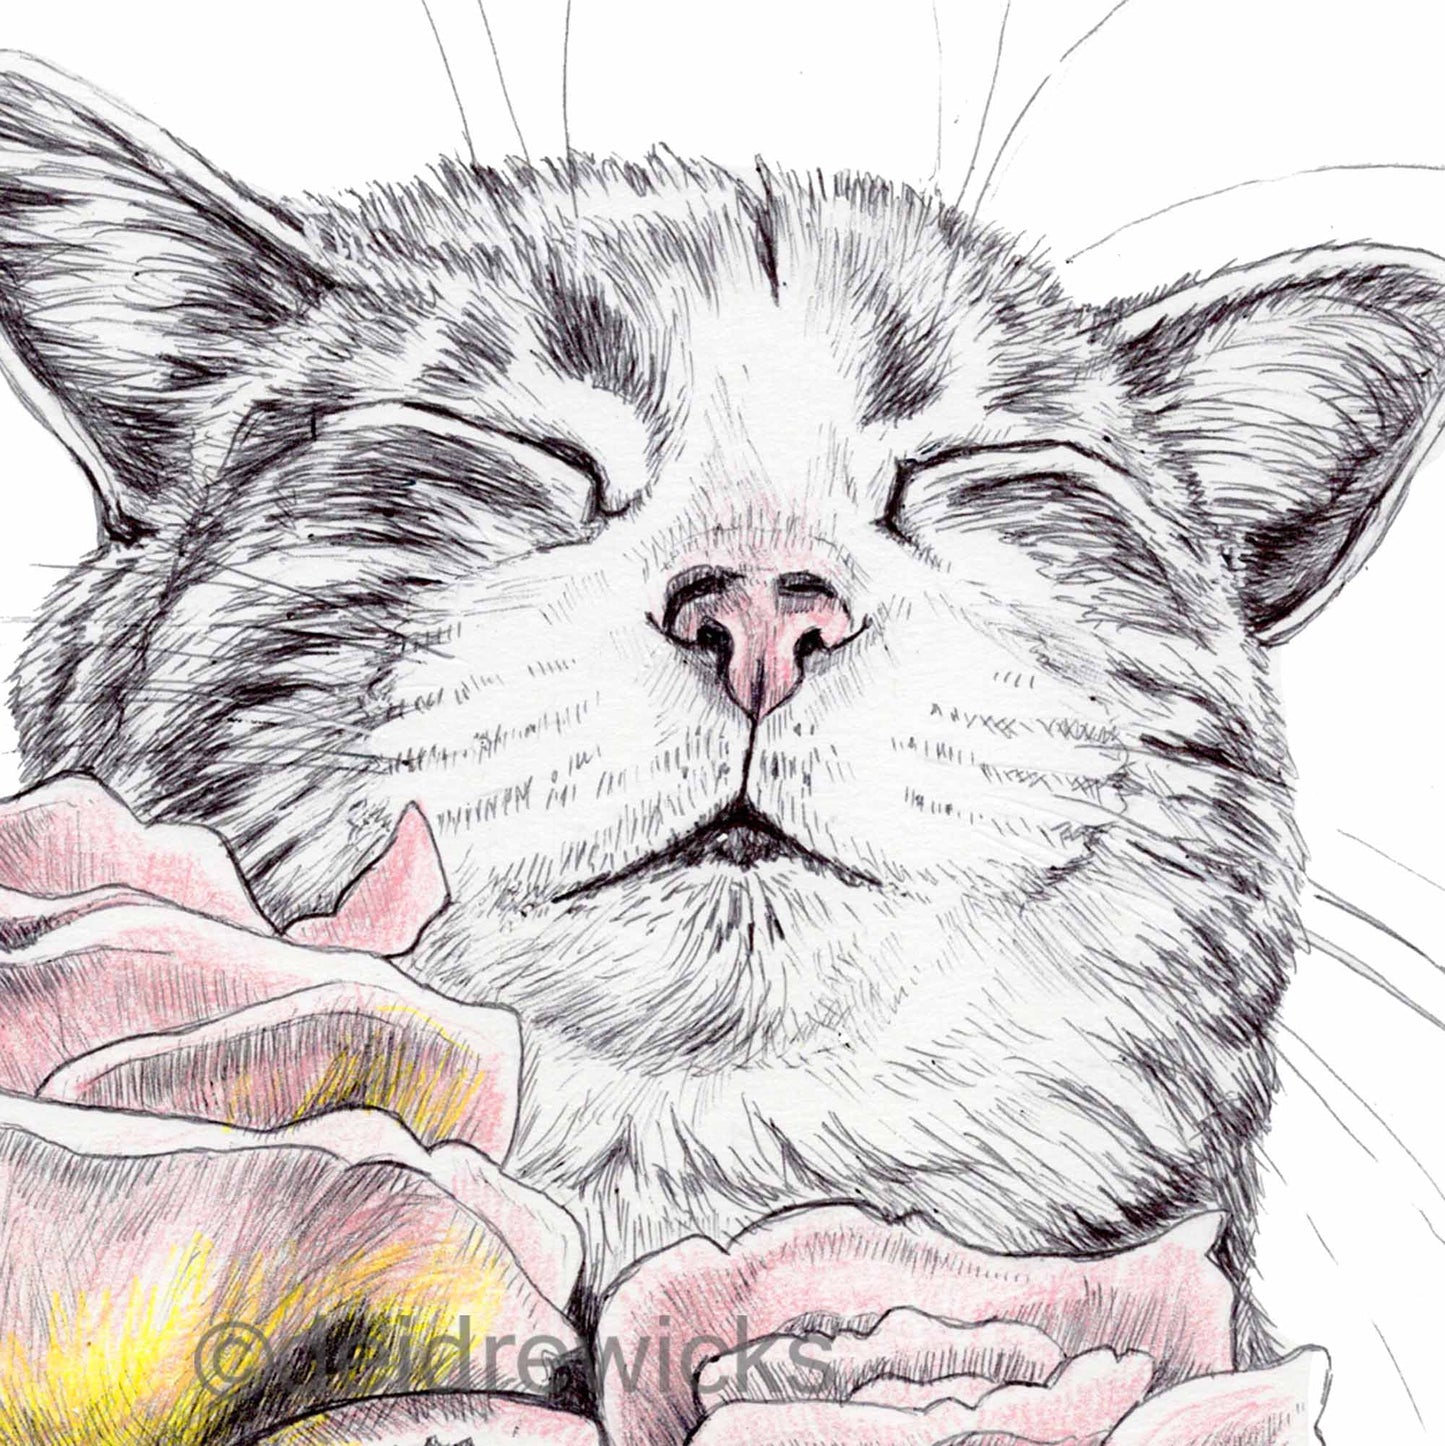 Ballpoint pen drawing of a tabby cat smelling pink and yellow tiffany roses. Art by Deidre Wicks